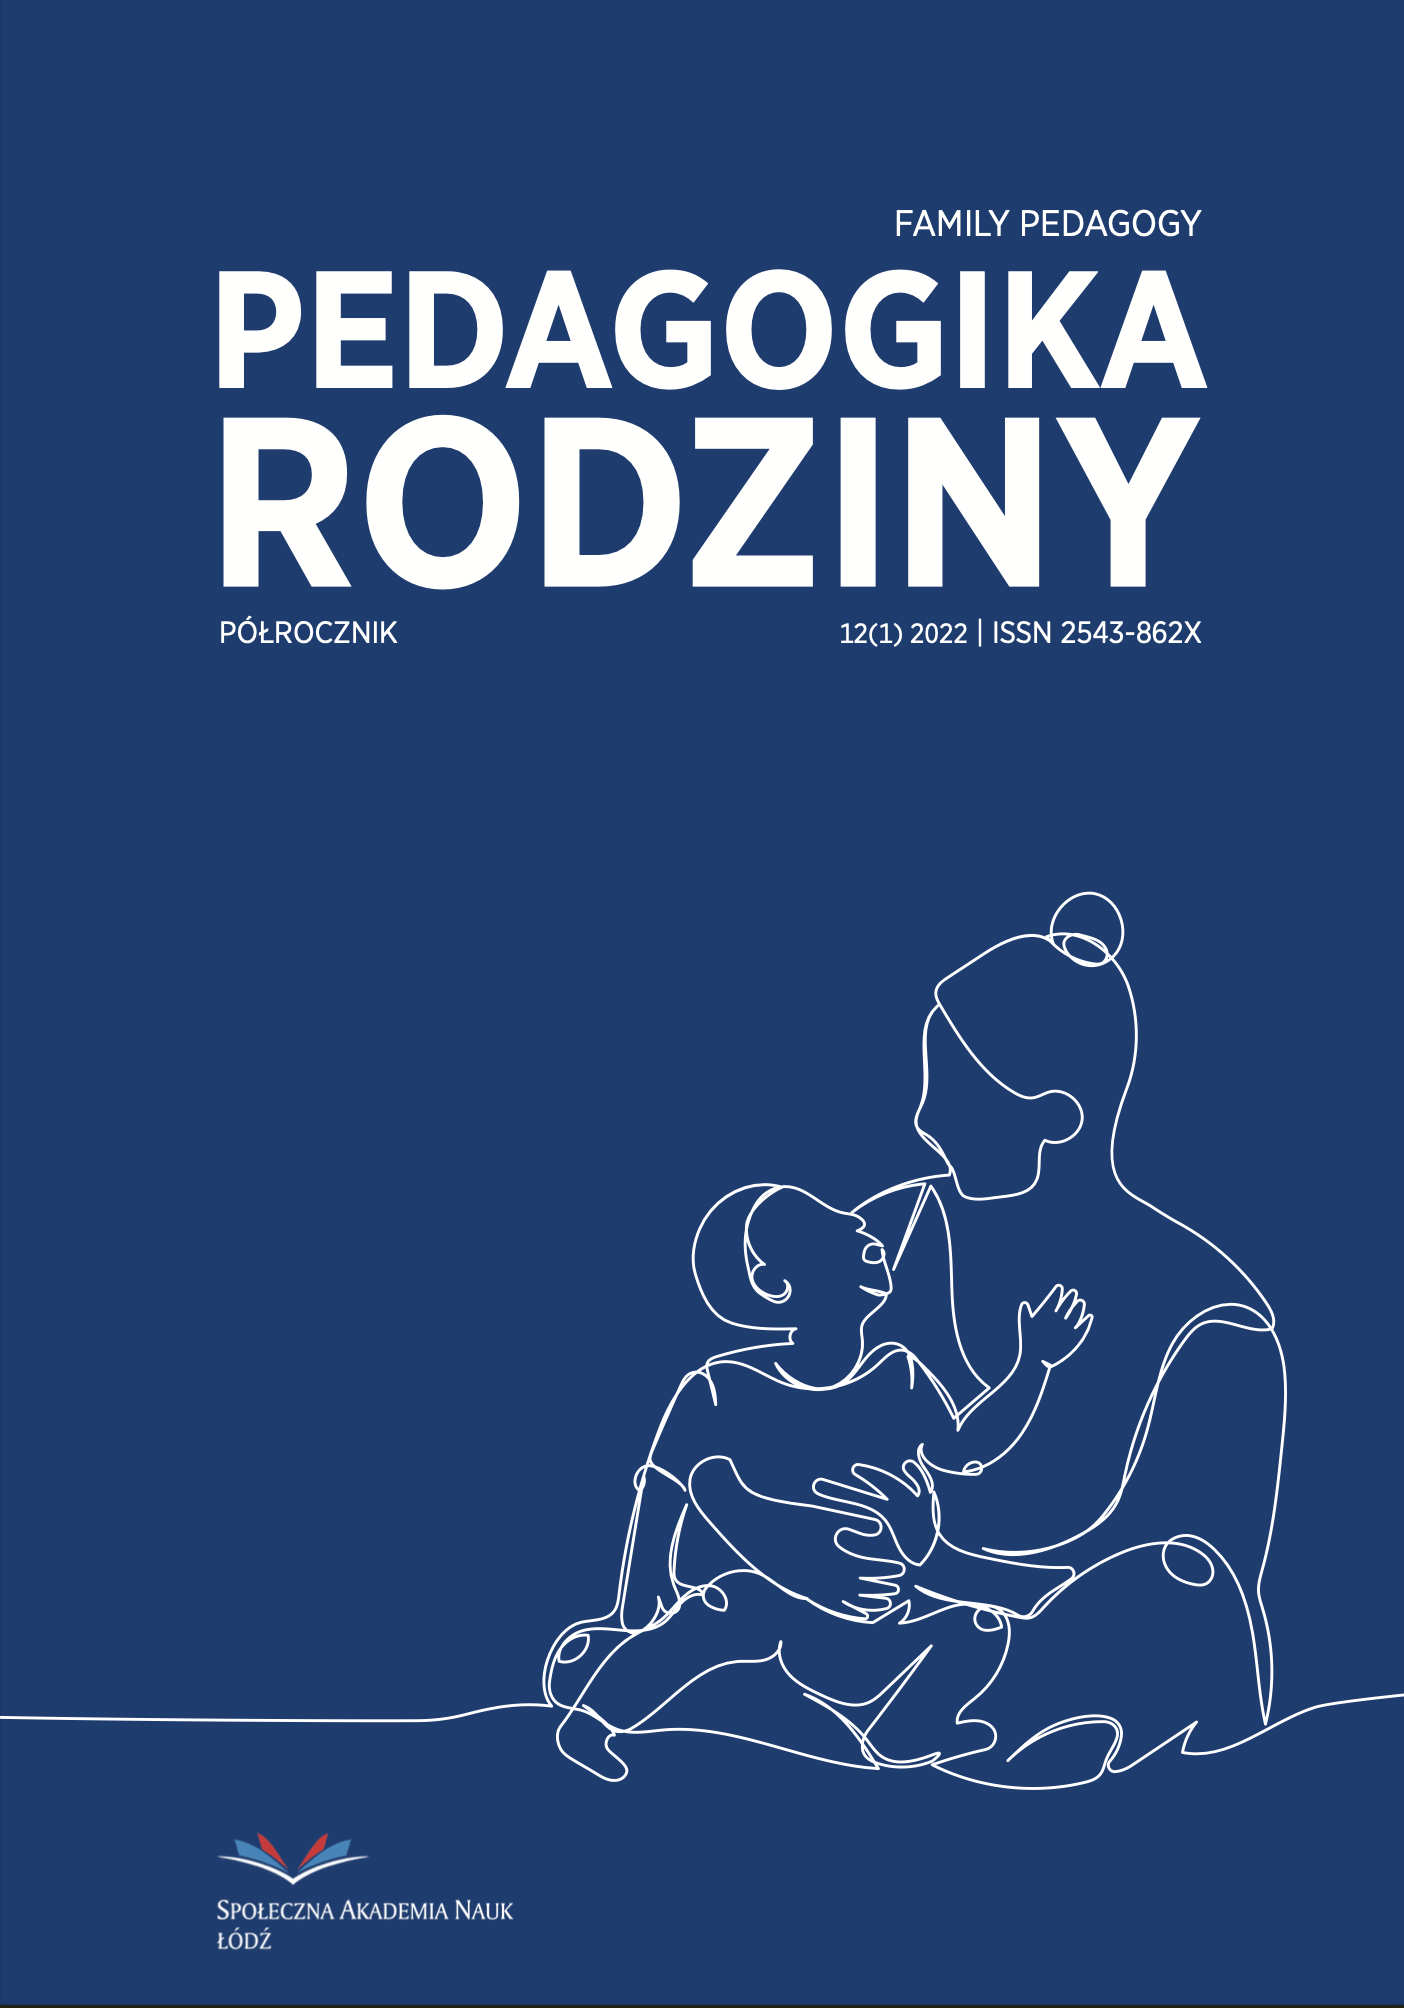 Causes of Mathematical Difficulties in Pupils of Younger Age
in the Opinion of Early Childhood Education Teachers from
the Town of Belchatow Cover Image